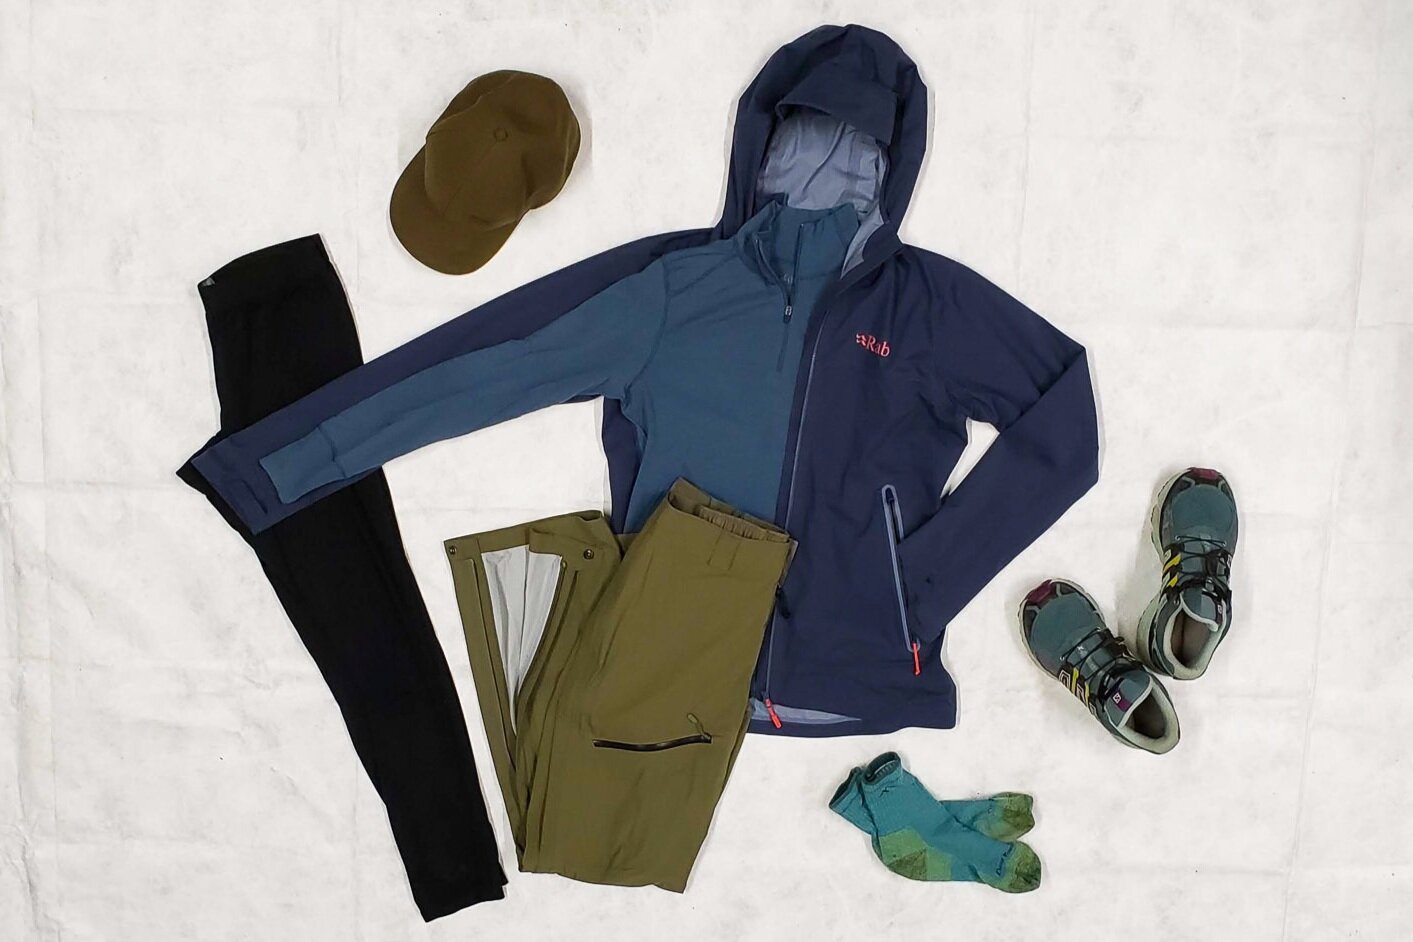 Typical clothing for a wet fall hike.